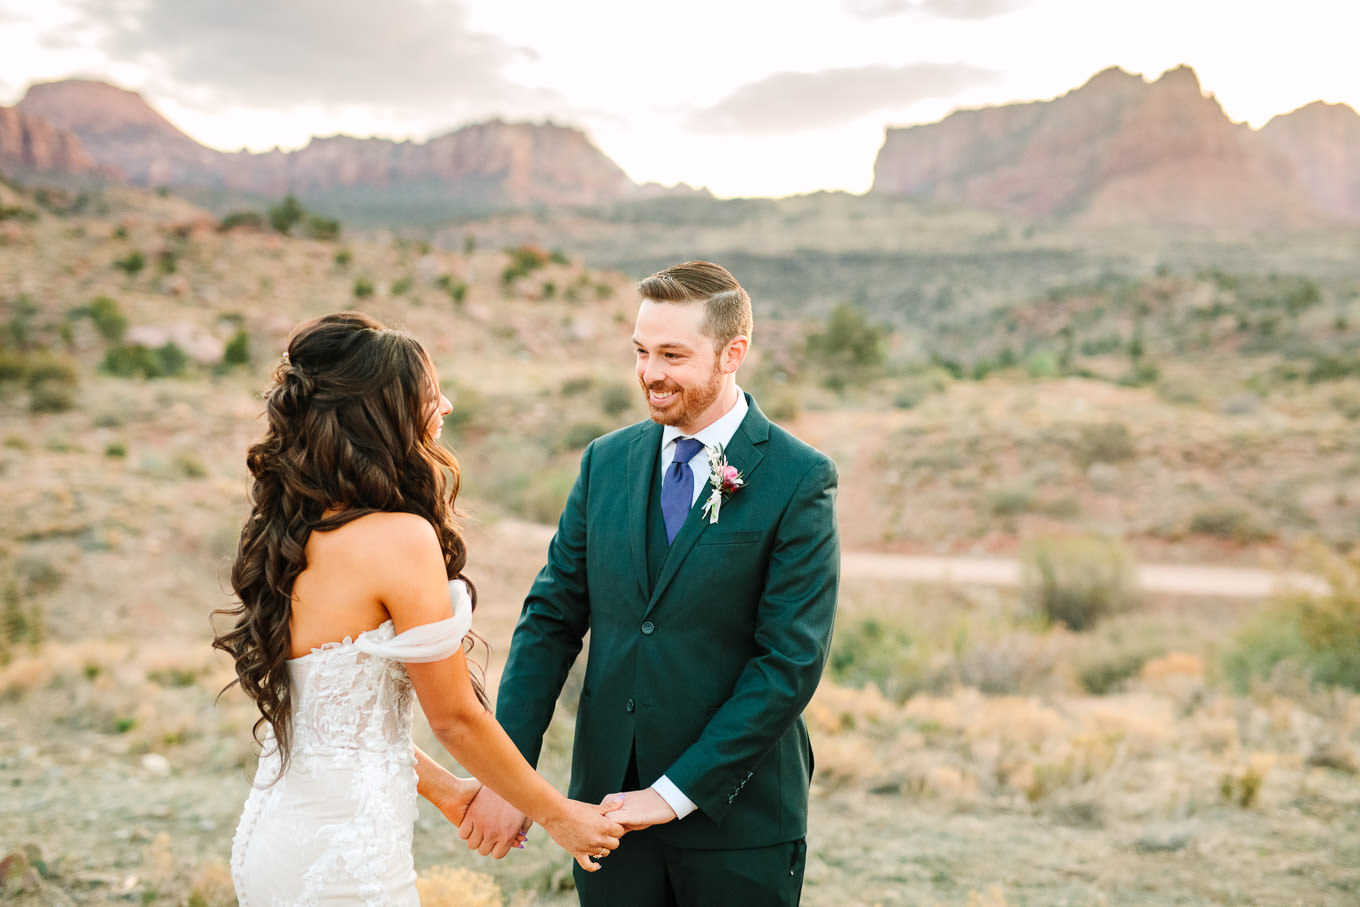 Bride and groom camping first look | Zion Under Canvas Elopement at Sunrise | Colorful adventure elopement photography | #utahelopement #zionelopement #zionwedding #undercanvaszion #sunriseelopement  Source: Mary Costa Photography | Los Angeles